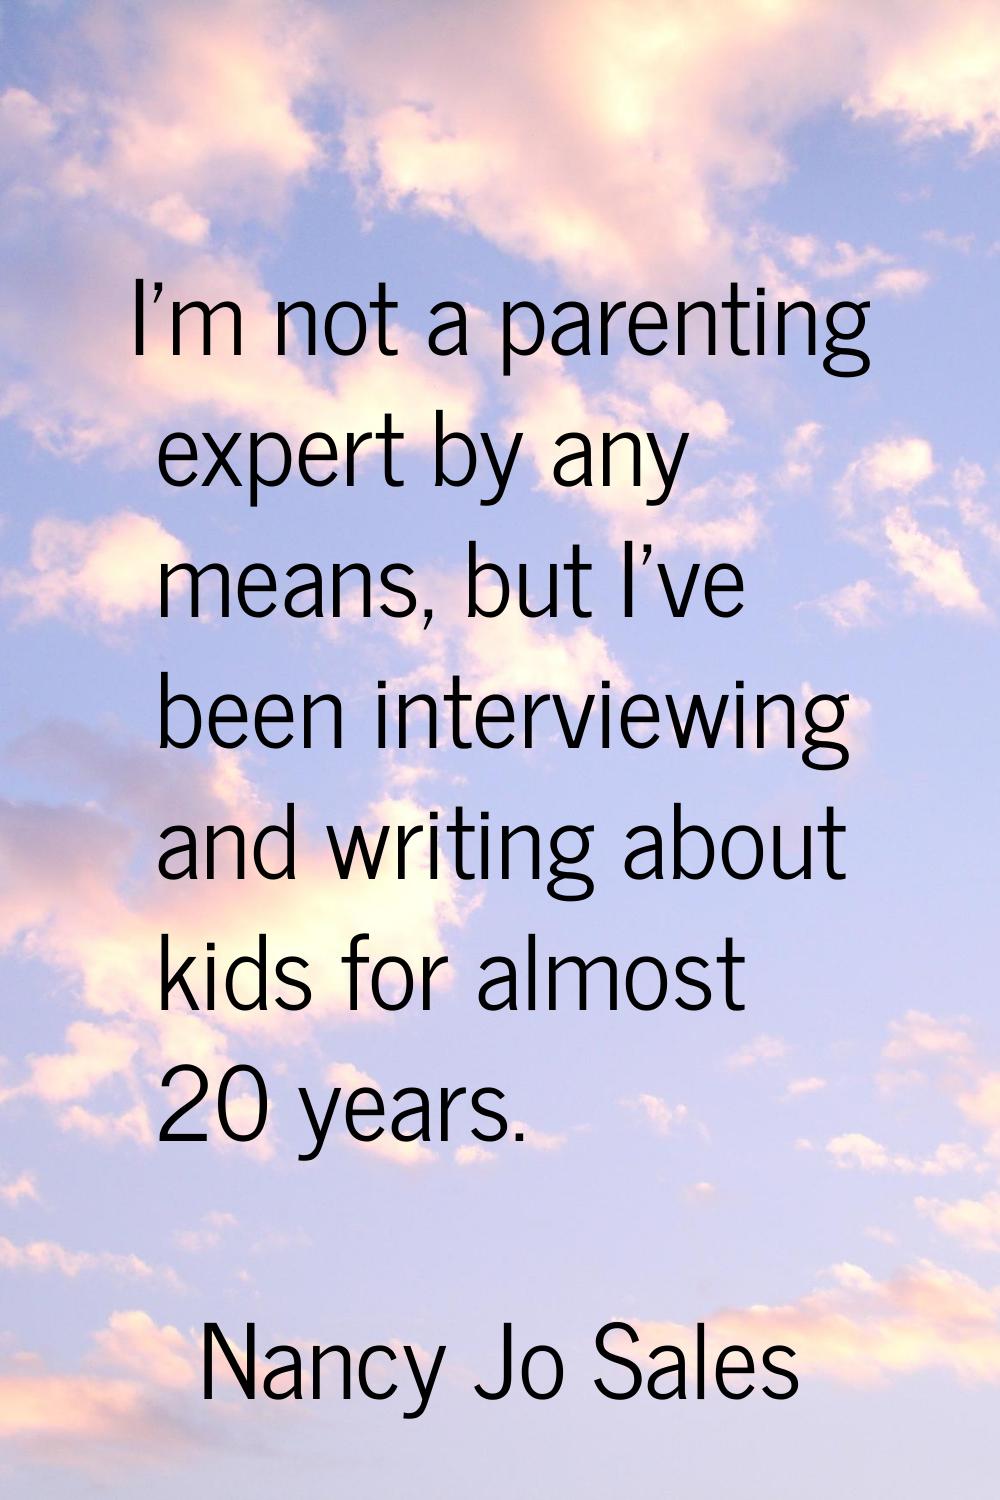 I'm not a parenting expert by any means, but I've been interviewing and writing about kids for almo